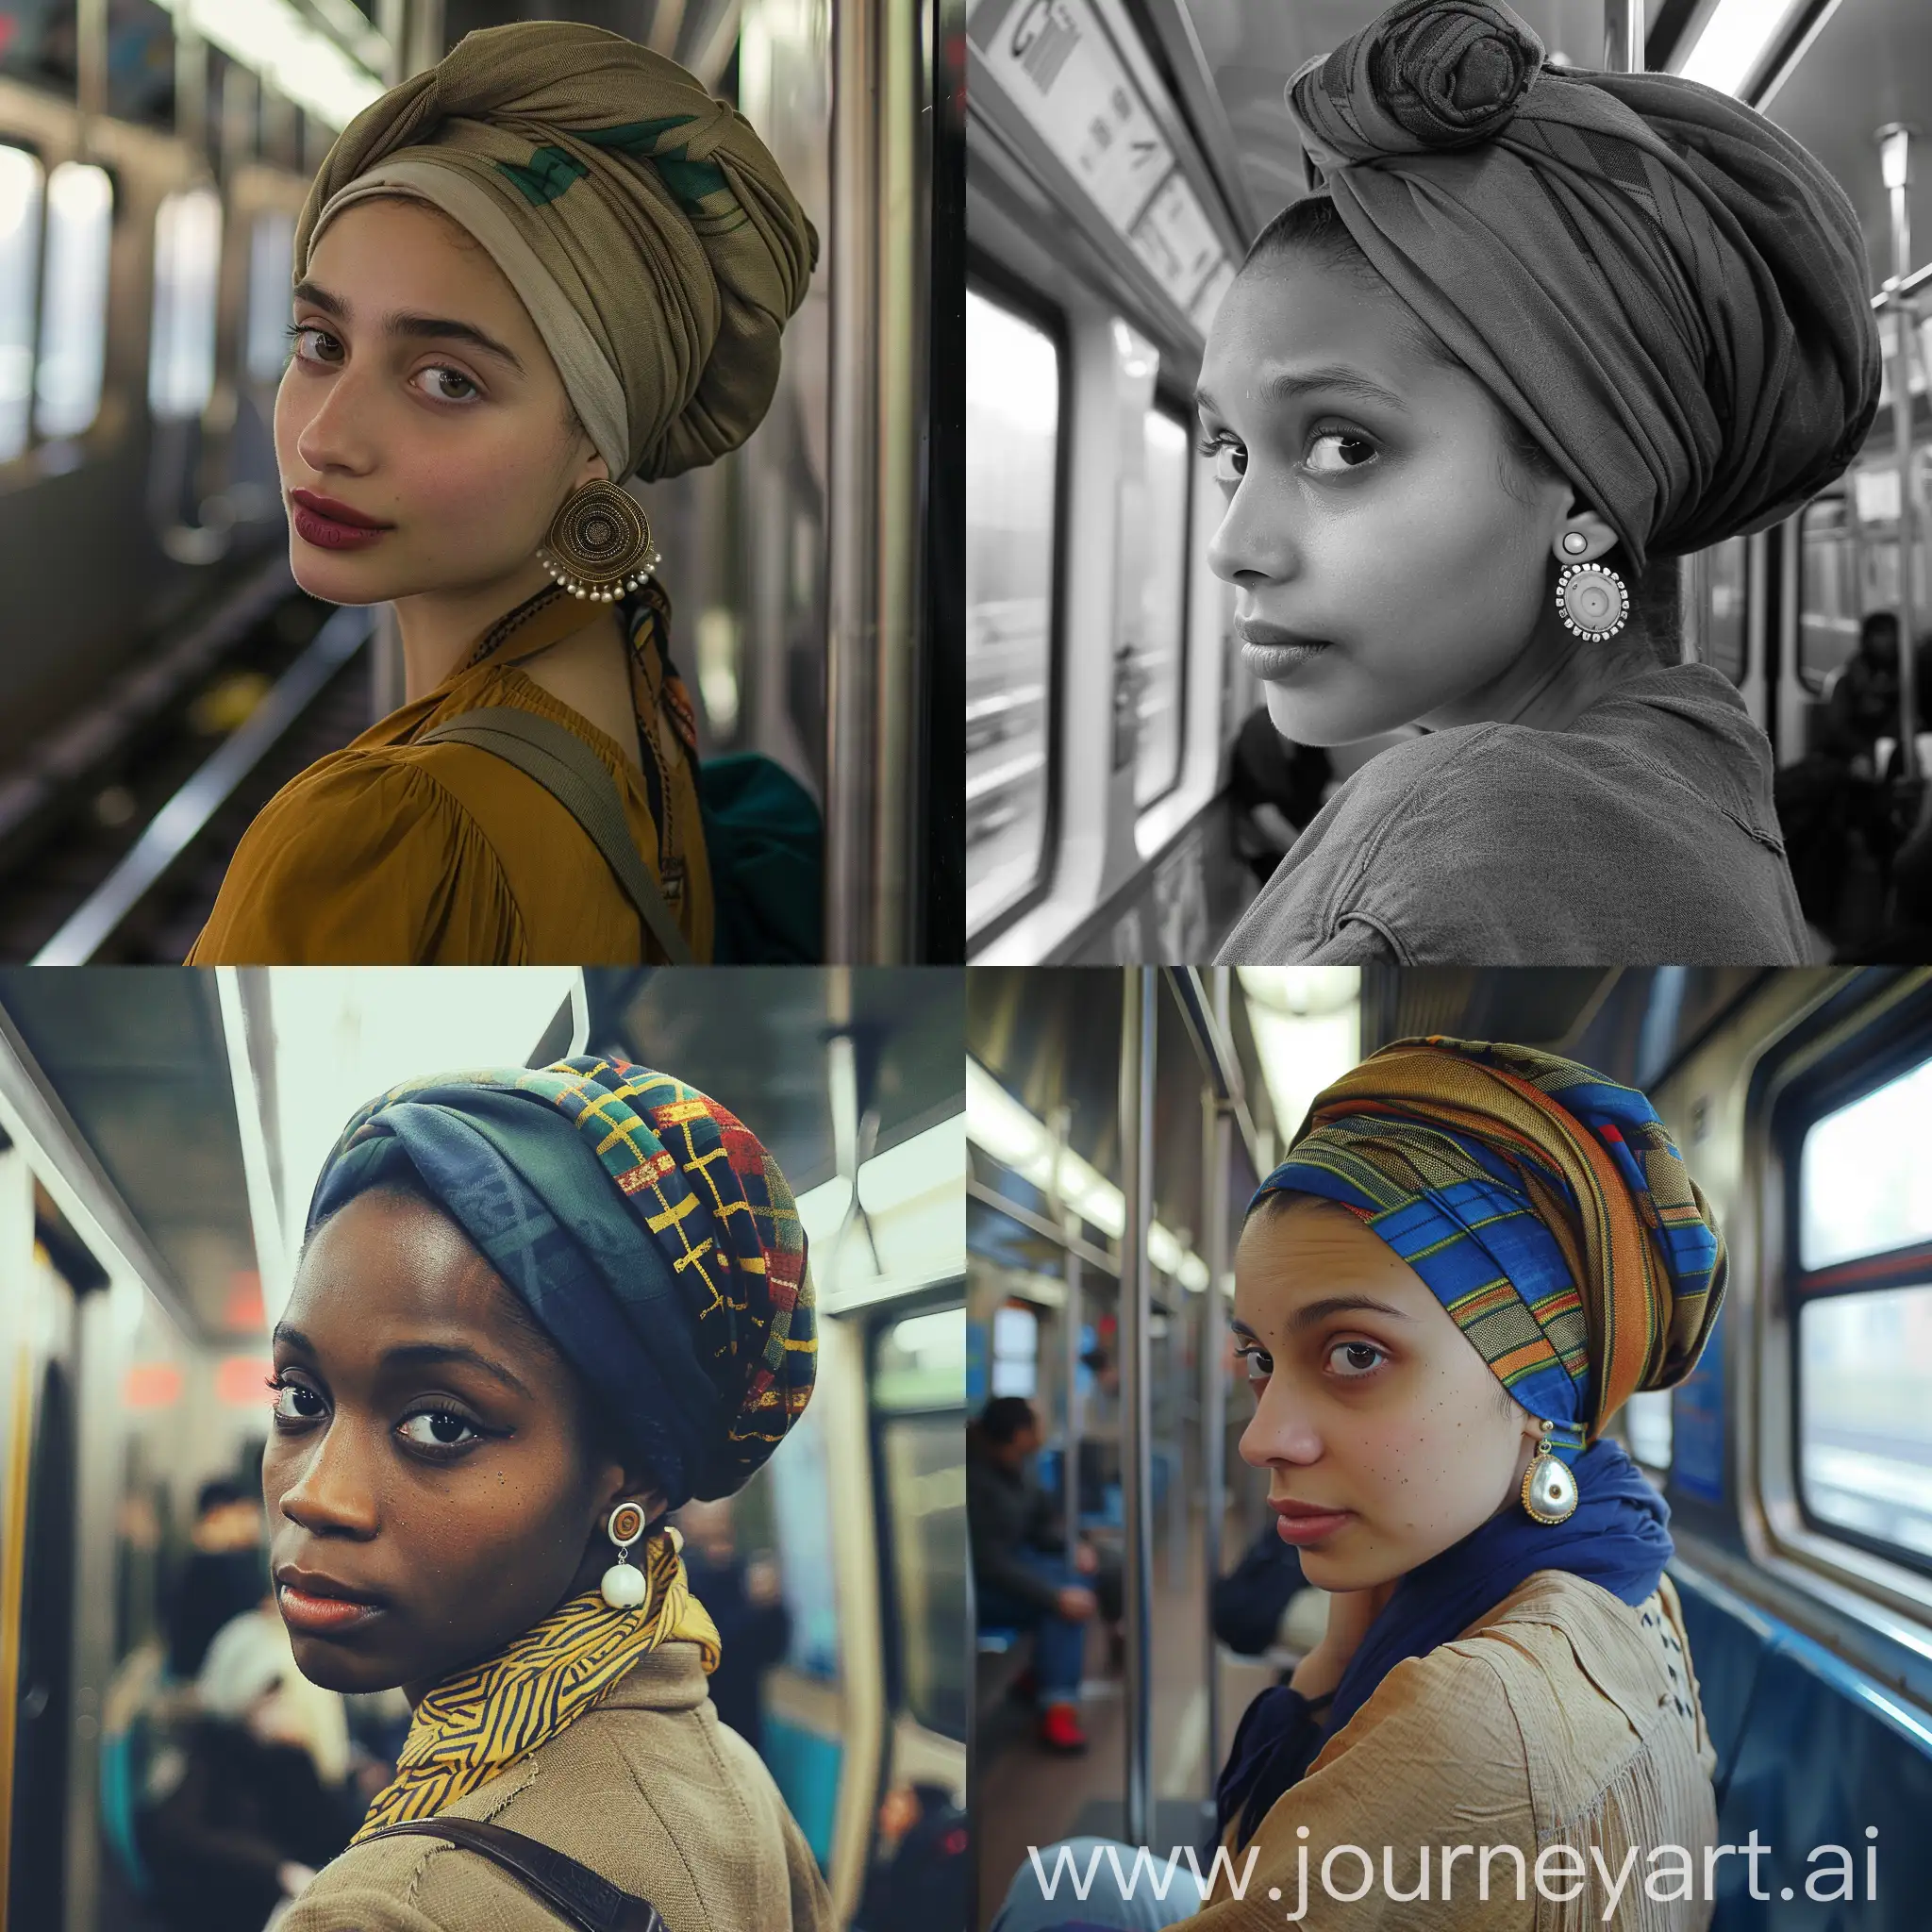 Contemplative-Woman-on-Subway-with-Distinctive-Earring-and-Head-Wrap